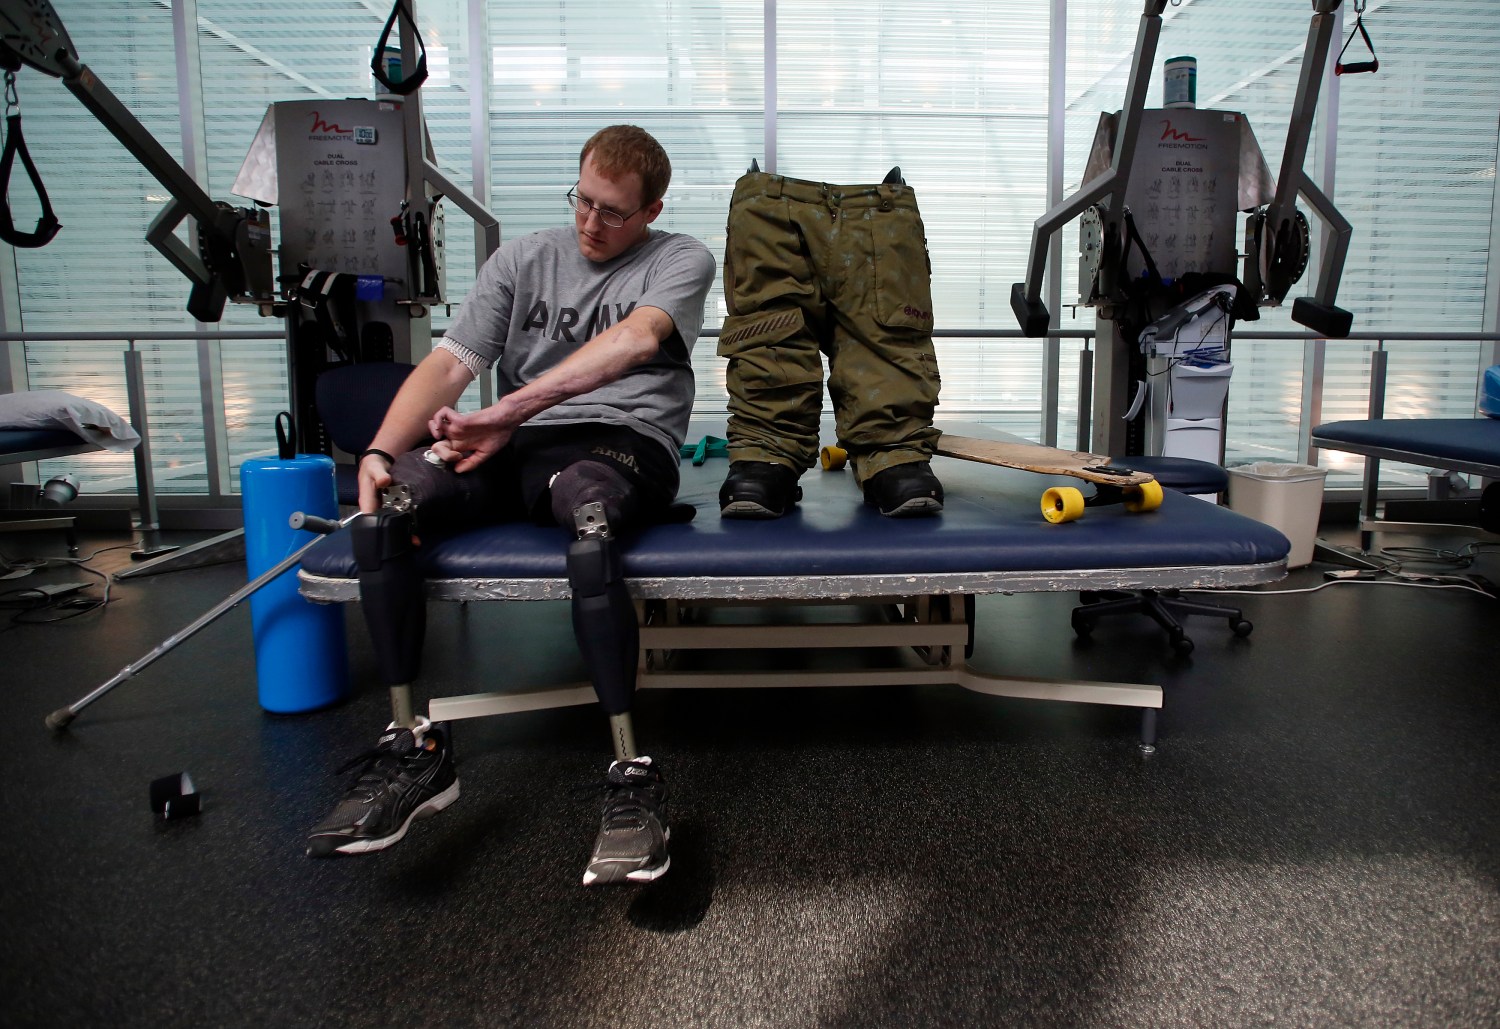 Sgt. Matt Krumwiede prepares to put on prosthetic legs to practice riding his longboard at the Center for the Intrepid at Brooke Army Medical Center in San Antonio, Texas, February 24, 2014. Krumwiede was on patrol in Afghanistan in 2012 when he stepped on an improvised explosive device which tore away both his legs, damaged his left arm, and ripped open his abdominal cavity. Since then he has undergone dozens of surgeries and spent time recovering at Brooke Medical Center in San Antonio, Texas, learning to walk again with the use of prosthetic legs. In June 2014, he visited to his hometown of Pocatello, Idaho for the first time since he was injured. Picture taken February 24, 2014. REUTERS/Jim Urquhart (UNITED STATES - Tags: MILITARY HEALTH POLITICS CIVIL UNREST TPX IMAGES OF THE DAY) ATTENTION EDITORS: PICTURE 24 OF 35 FOR PACKAGE 'KANDAHAR TO IDAHO - A LIFE IN RECOVERY' TO FIND ALL IMAGES SEARCH 'MATT KRUMWIEDE' - GM1EA7O158C01